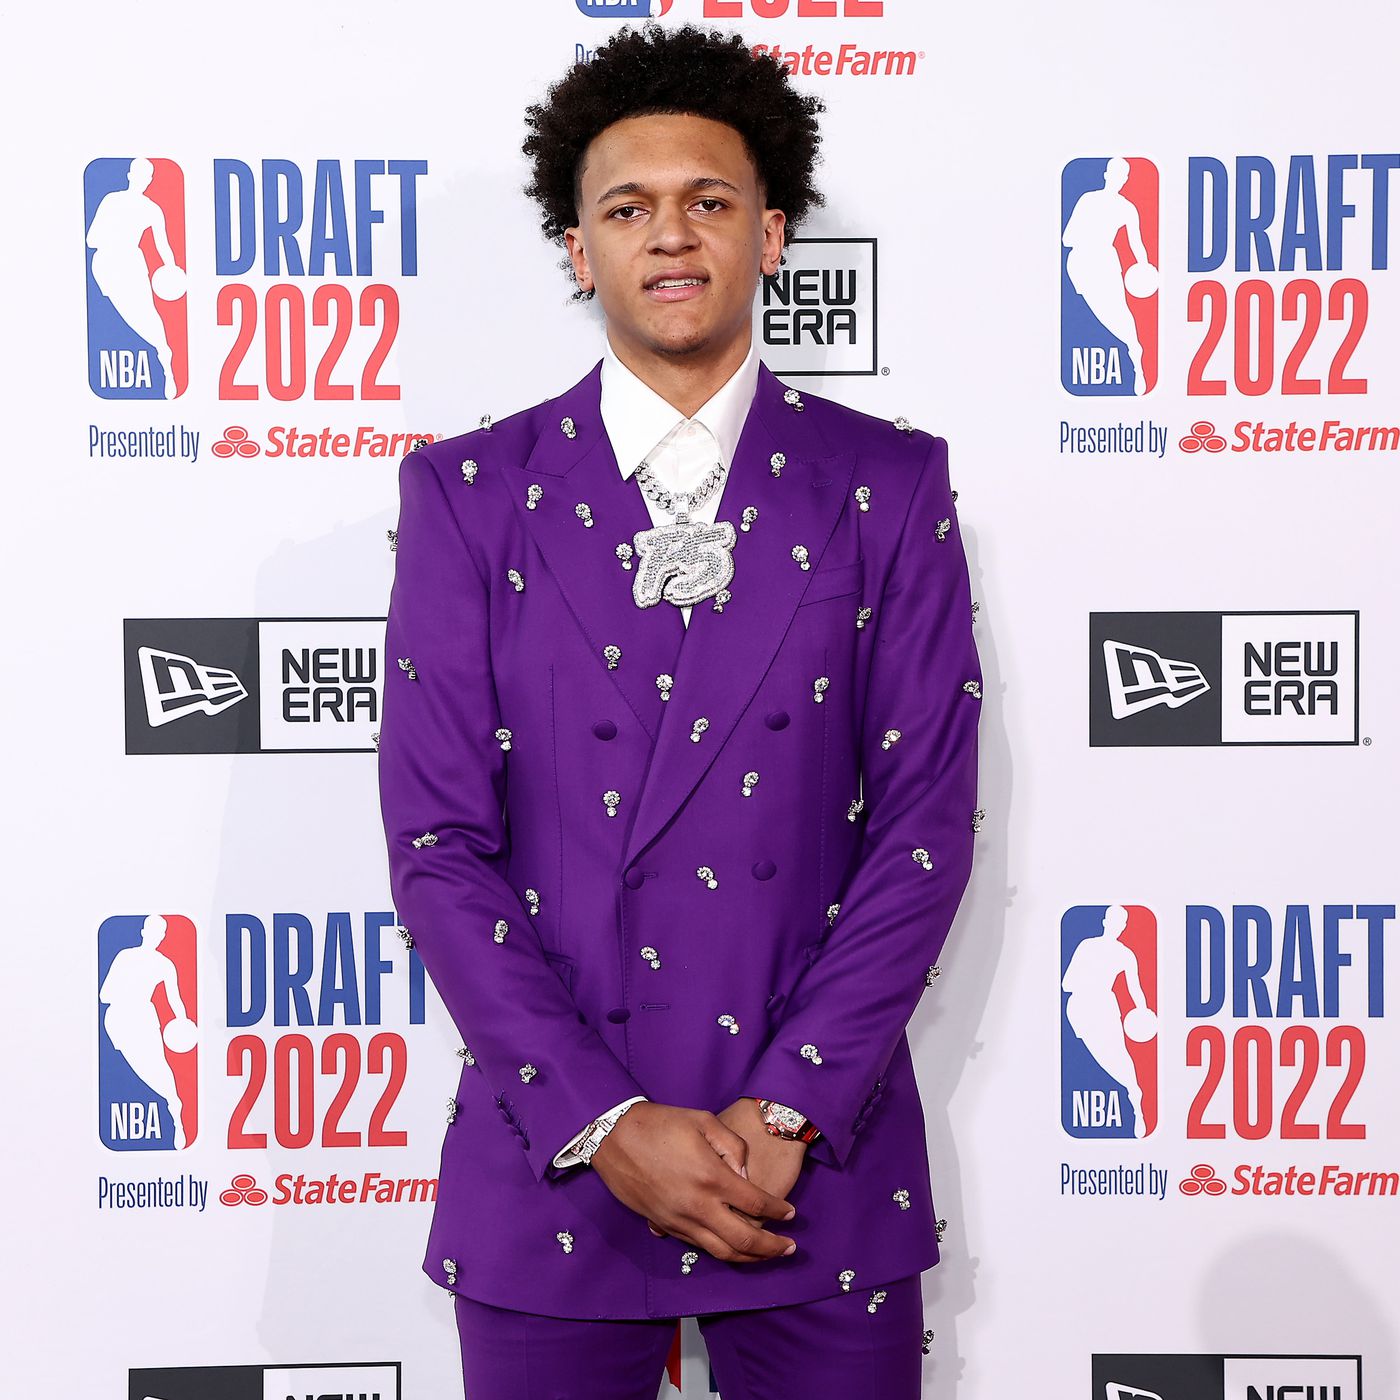 NBA Draft results 2022: Pick-by-pick tracker for every selection 